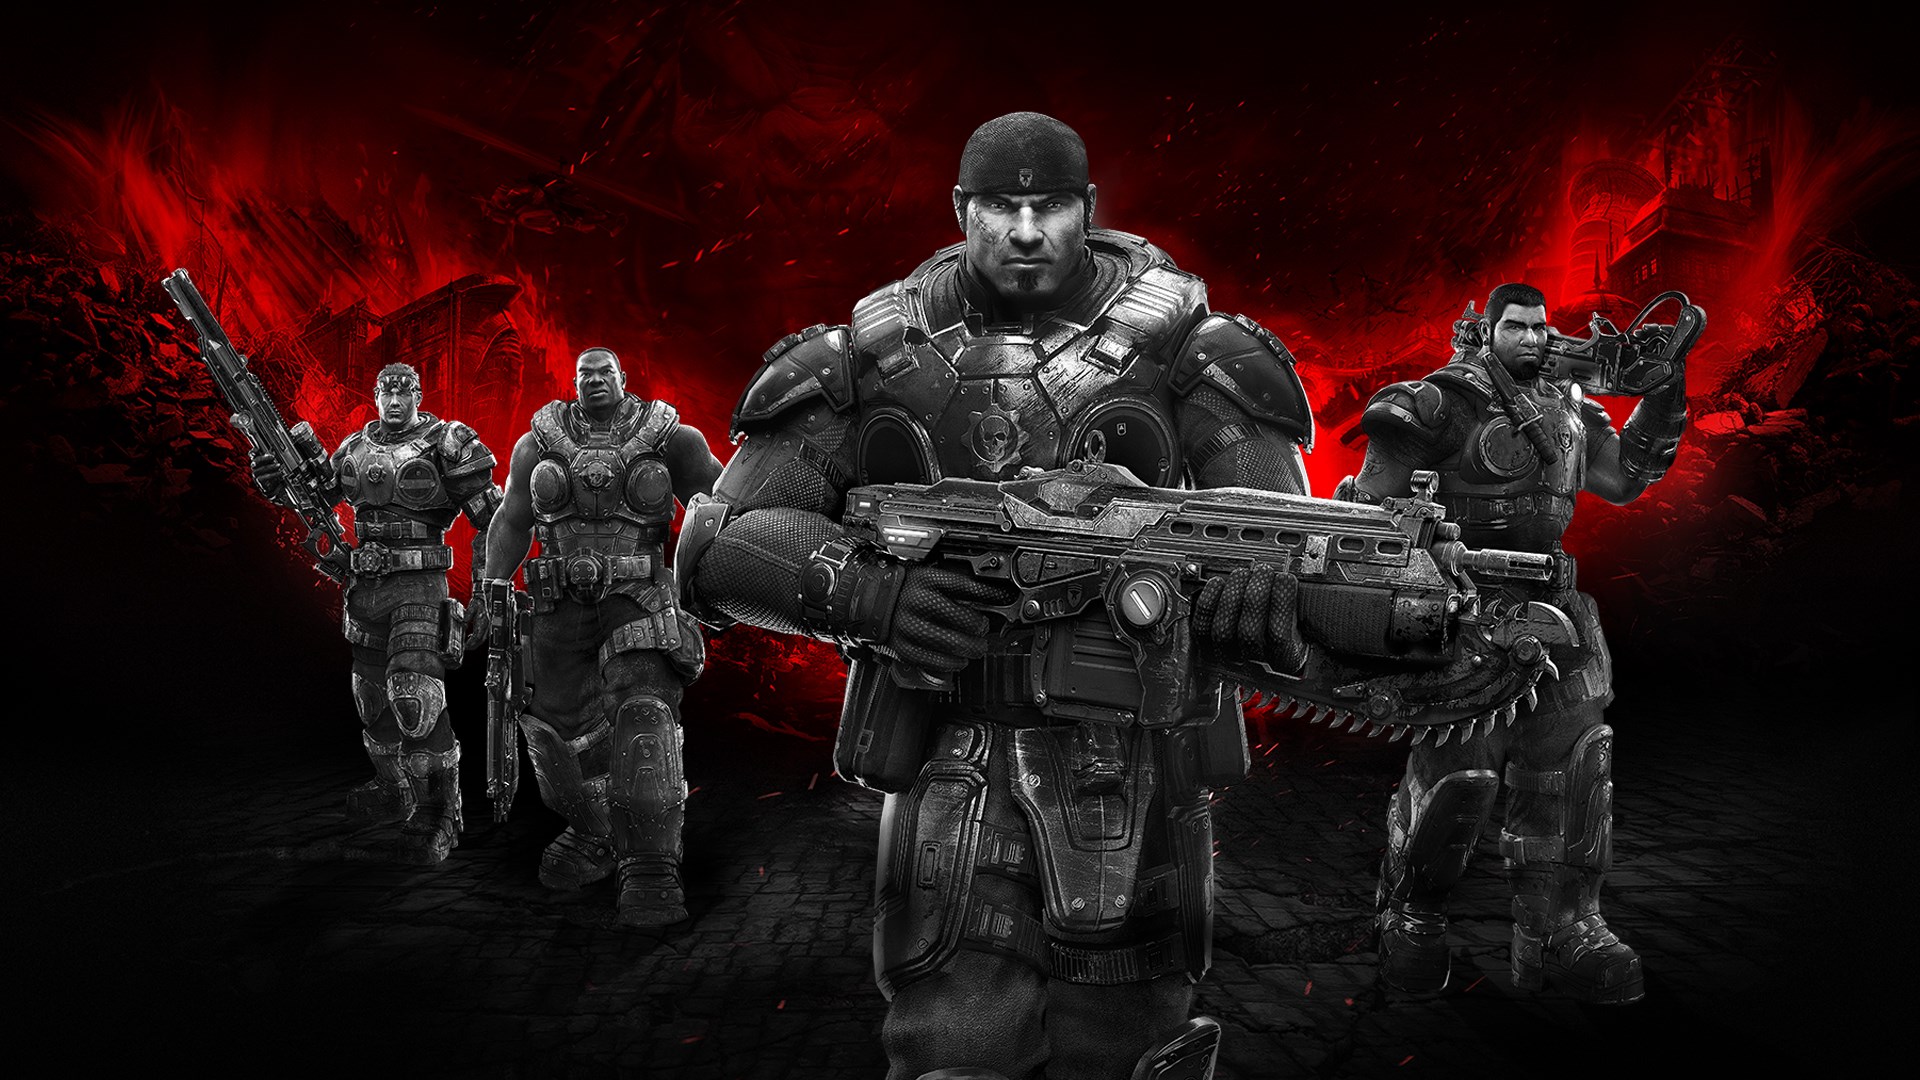 Xbox One Gears of War Ultimate Edition – Games Crazy Deals